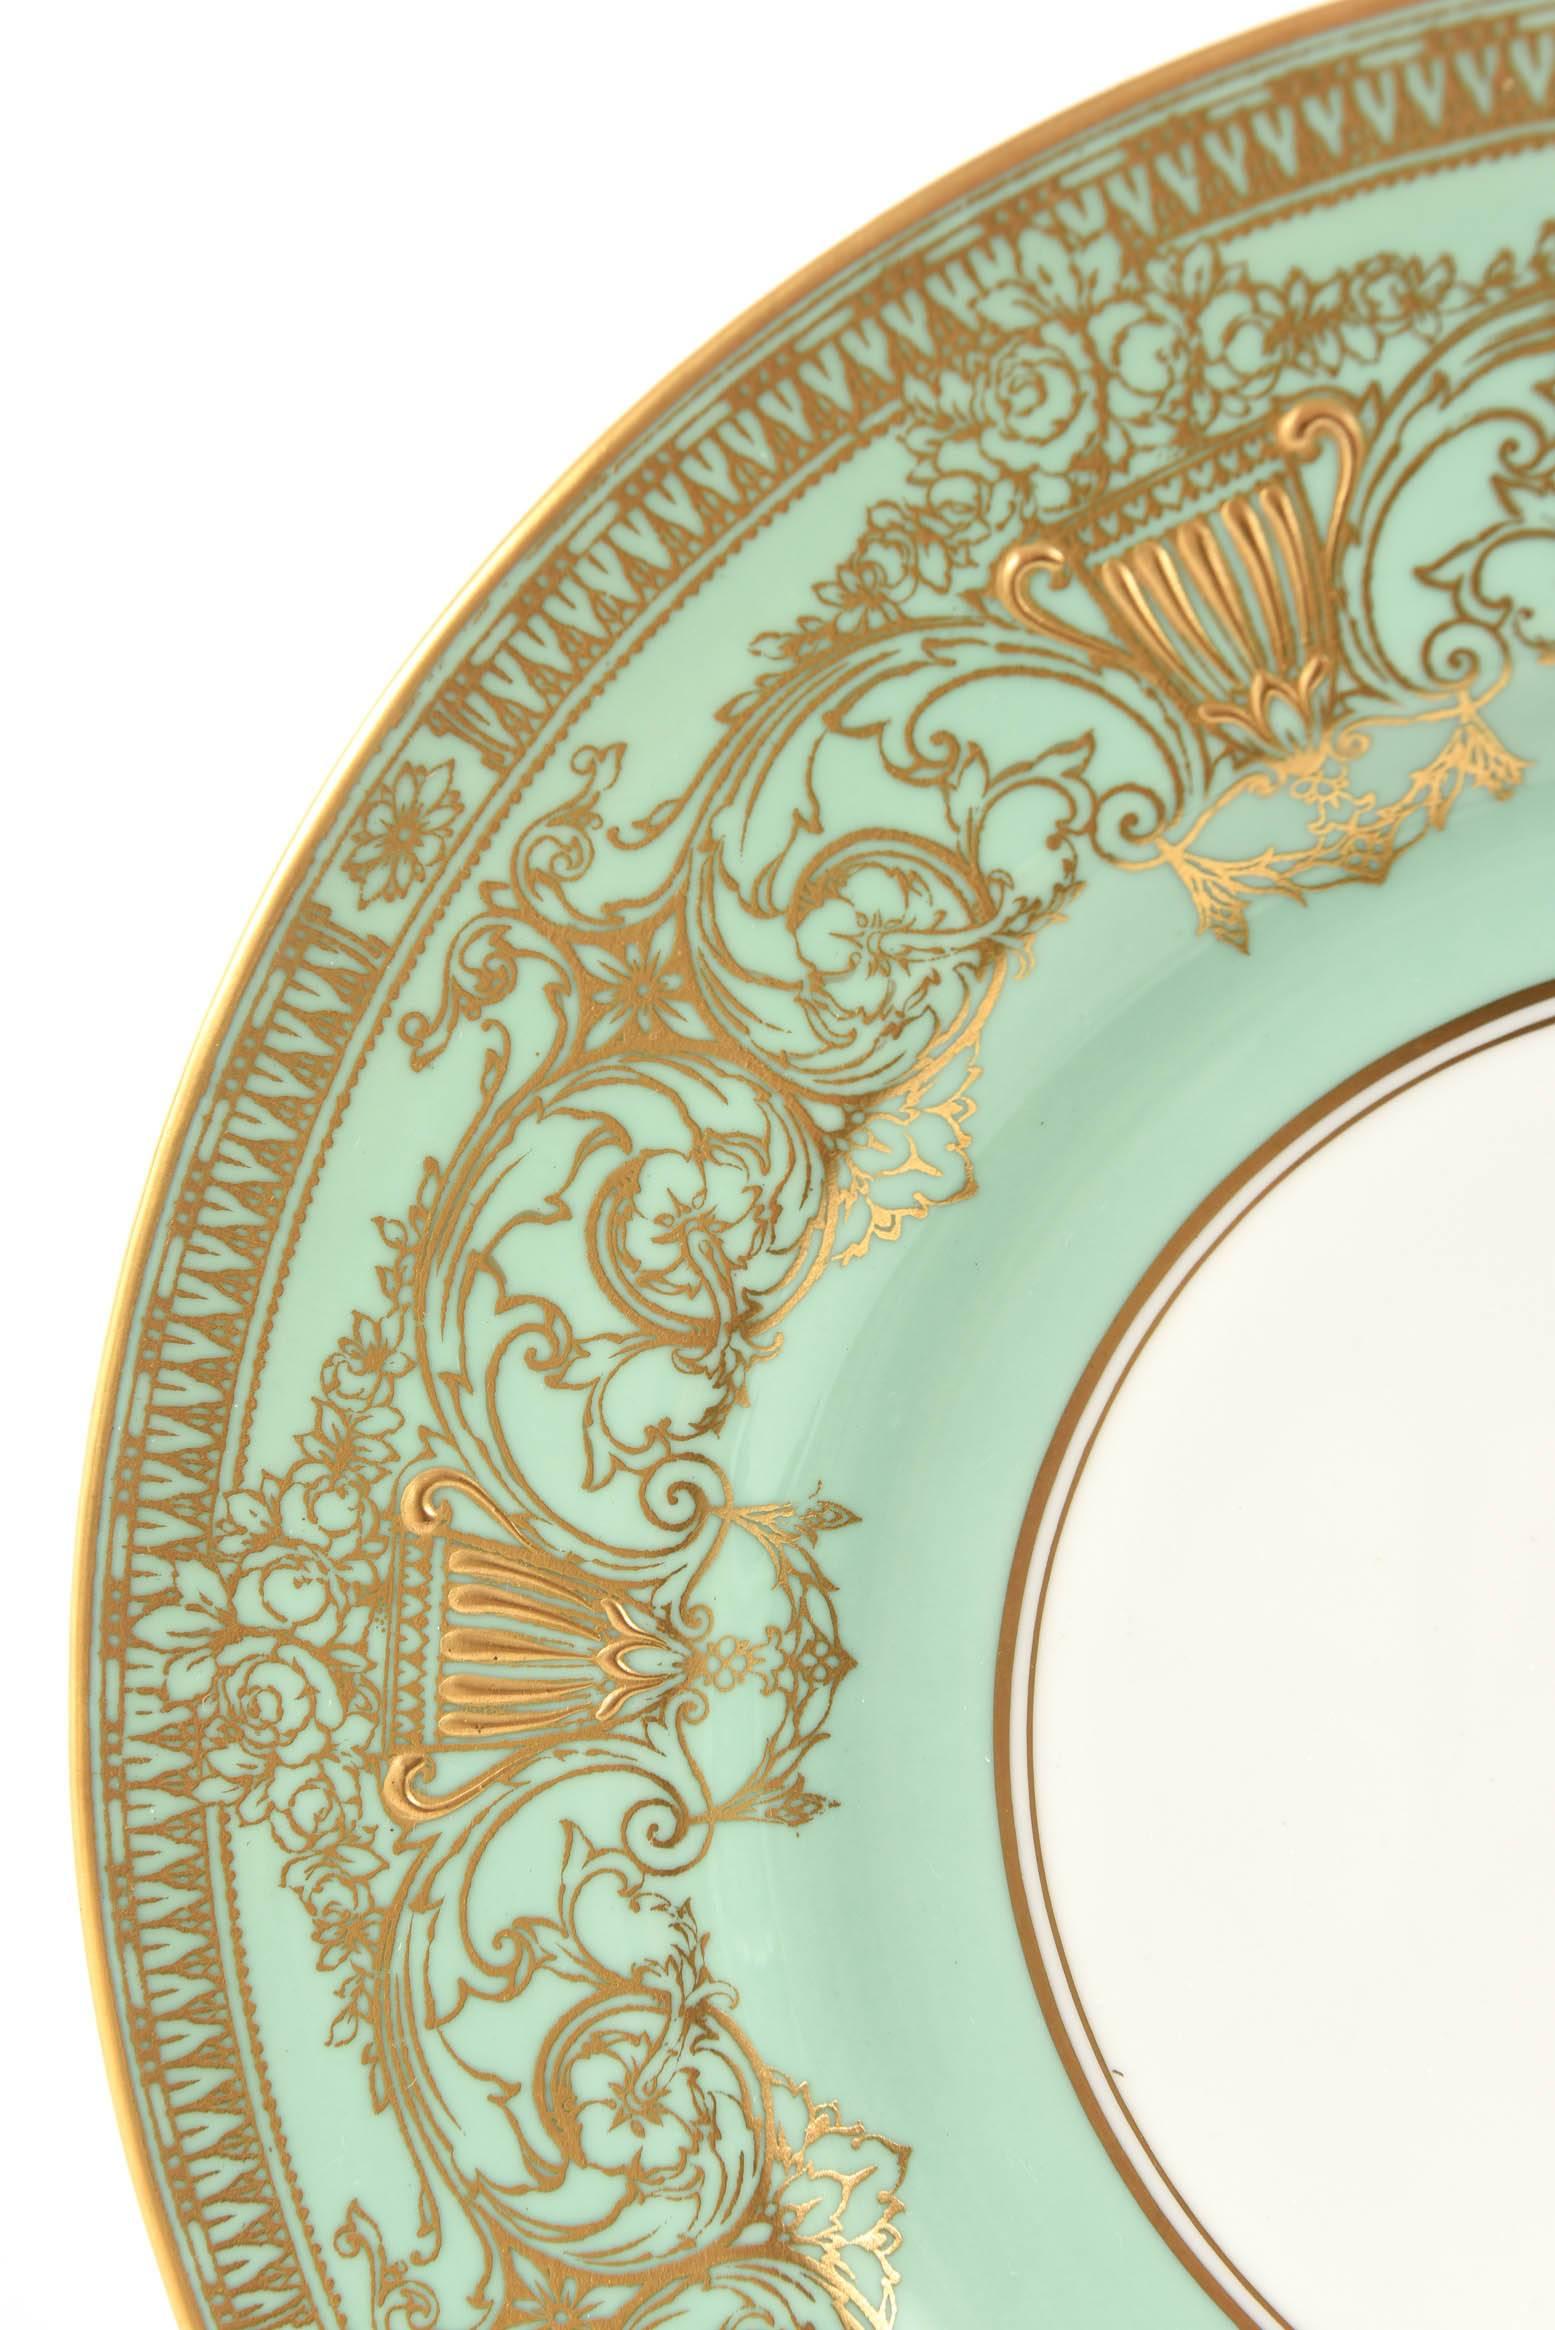 Set Ten Stunning Turquoise Elaborately Gilded Dinner/Presentation Plates In Good Condition For Sale In West Palm Beach, FL